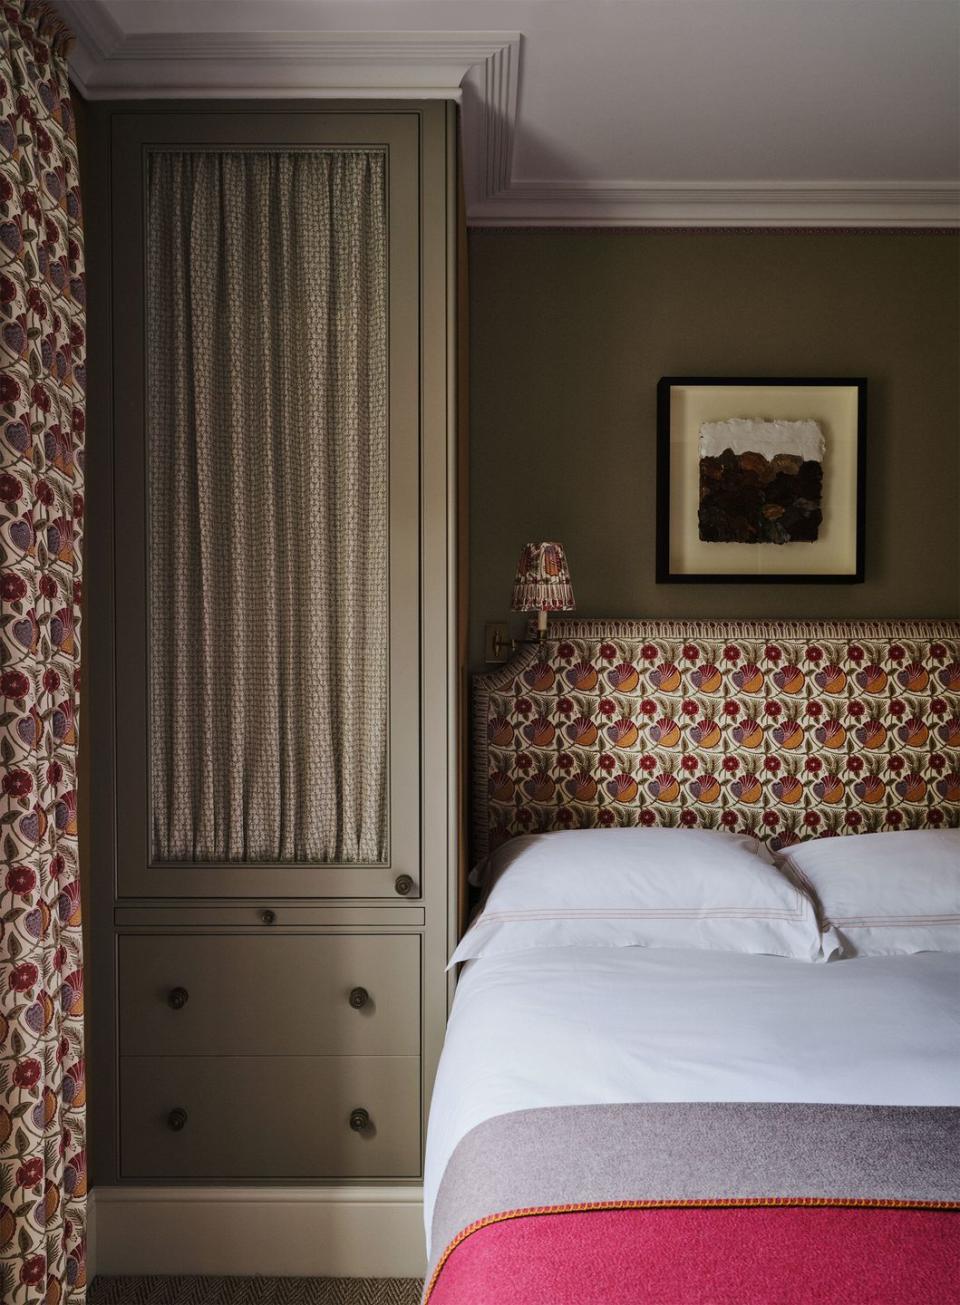 a guest bedroom has matching fabric on the headboard, sconce, and curtains, bed is dressed in white linens and a gray and rose wool blanket, built in closet with drawers, framed art above the headboard